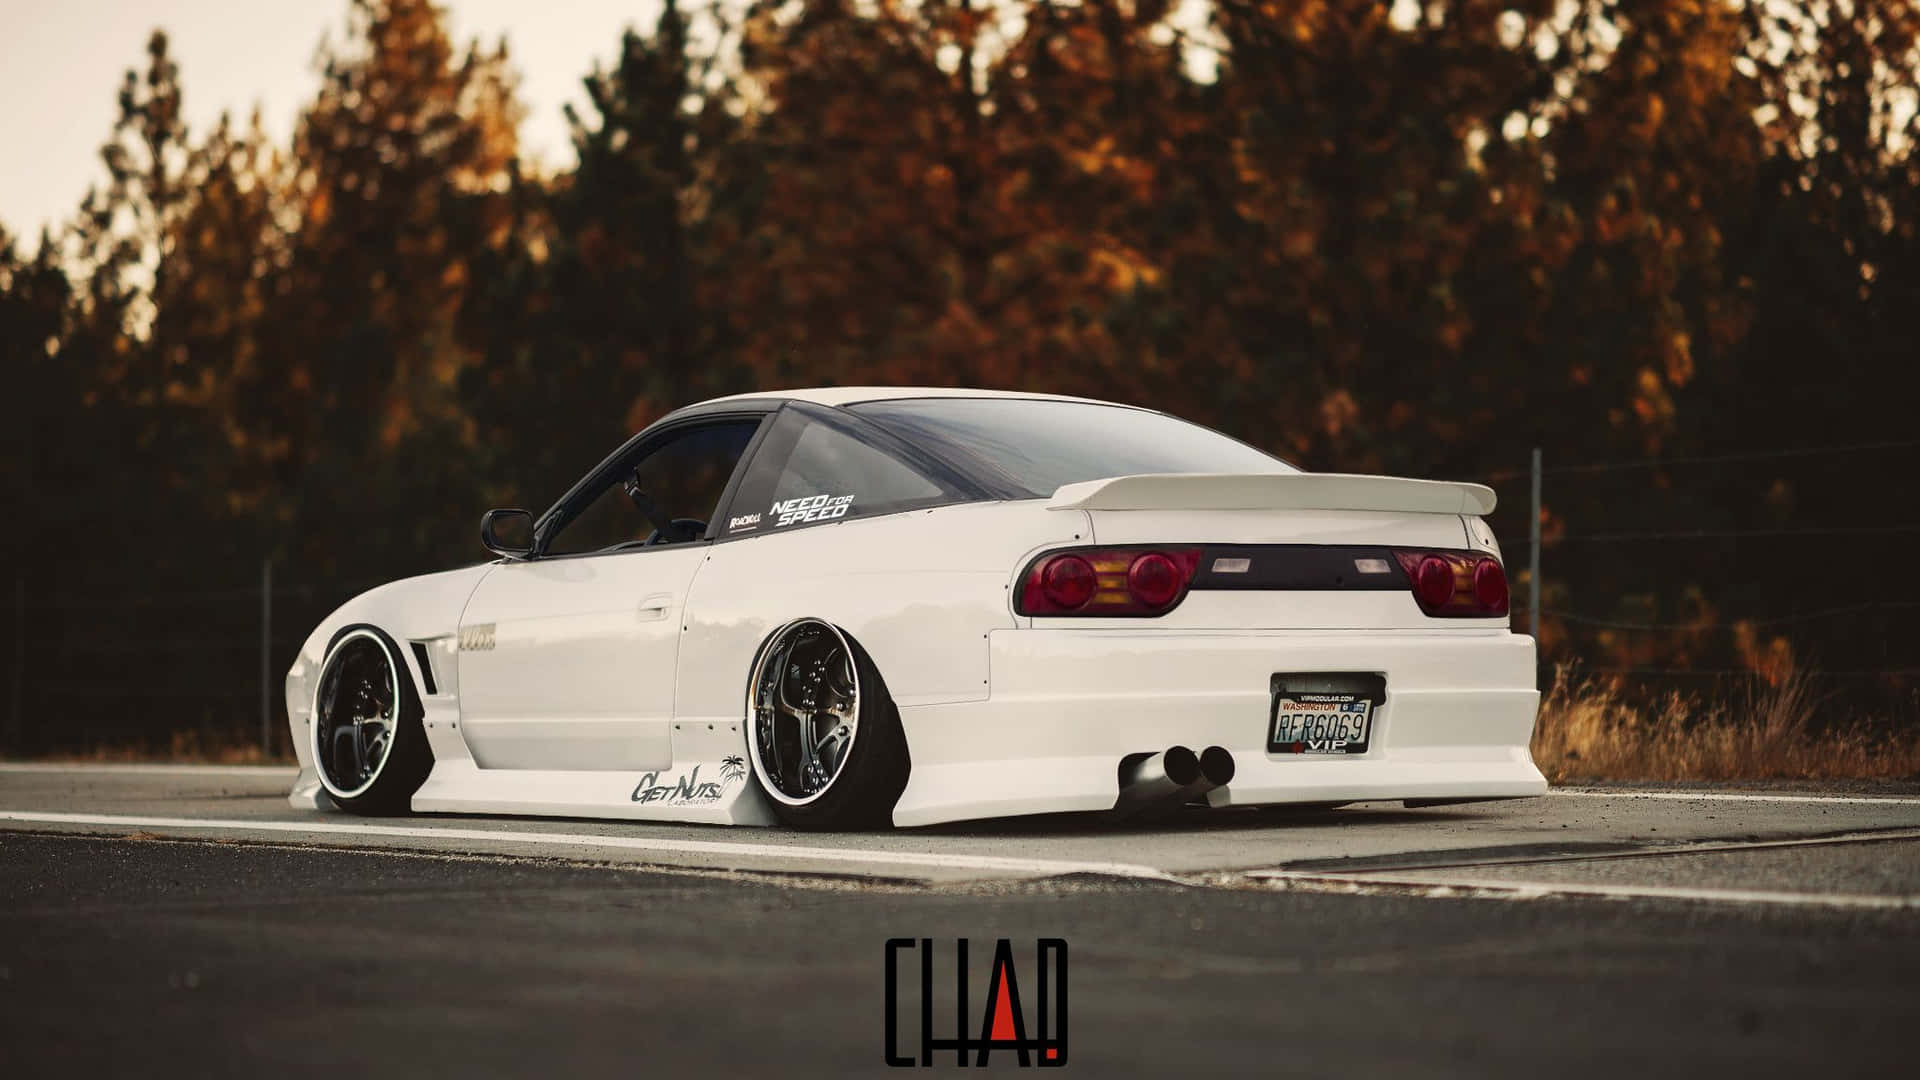 The Iconic Nissan Silvia S13 Wallpaper